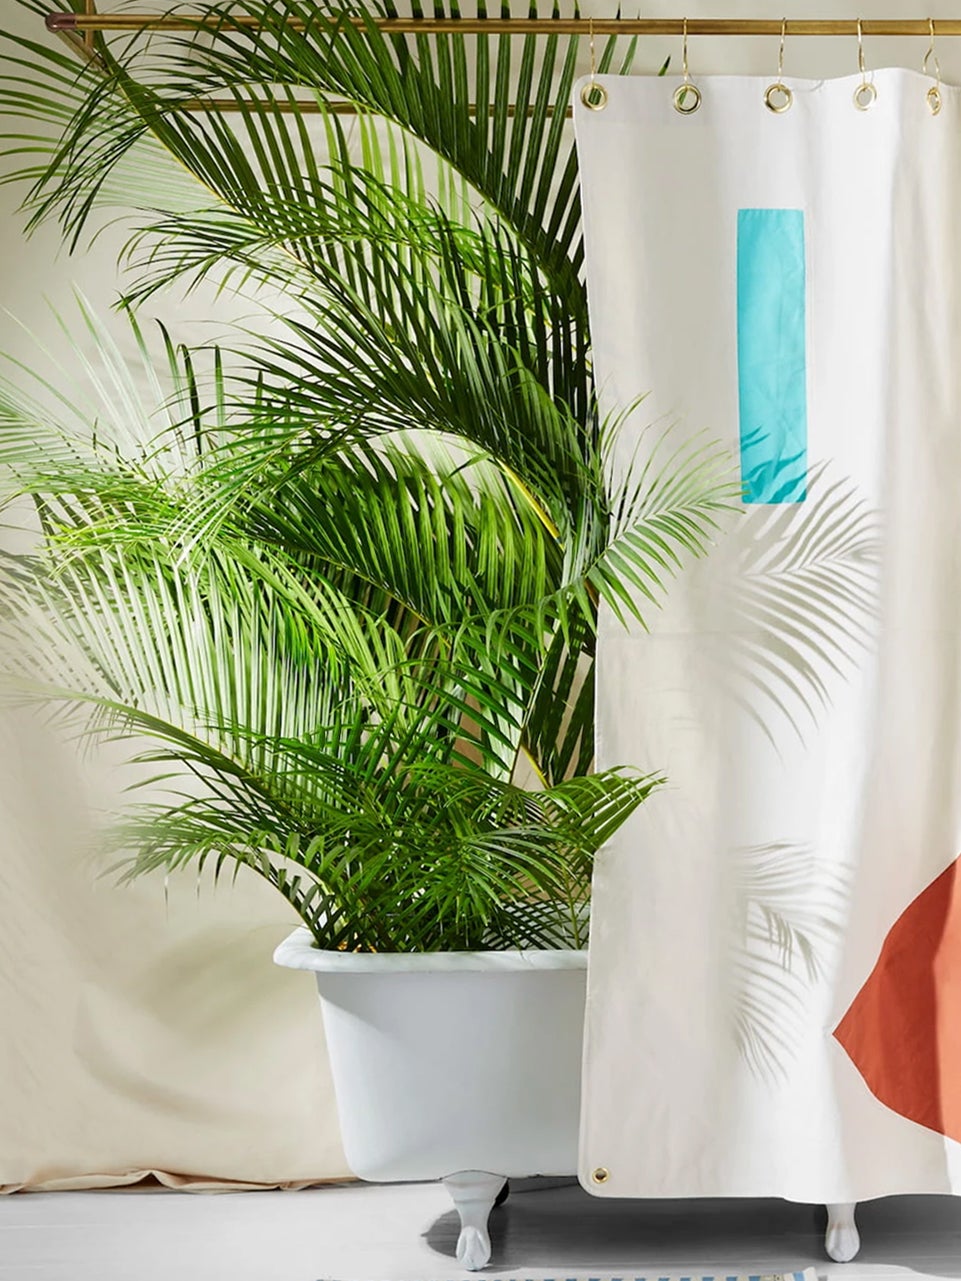 Turn Your Bathroom Into a Mini Jungle With These Shower-Friendly Plants